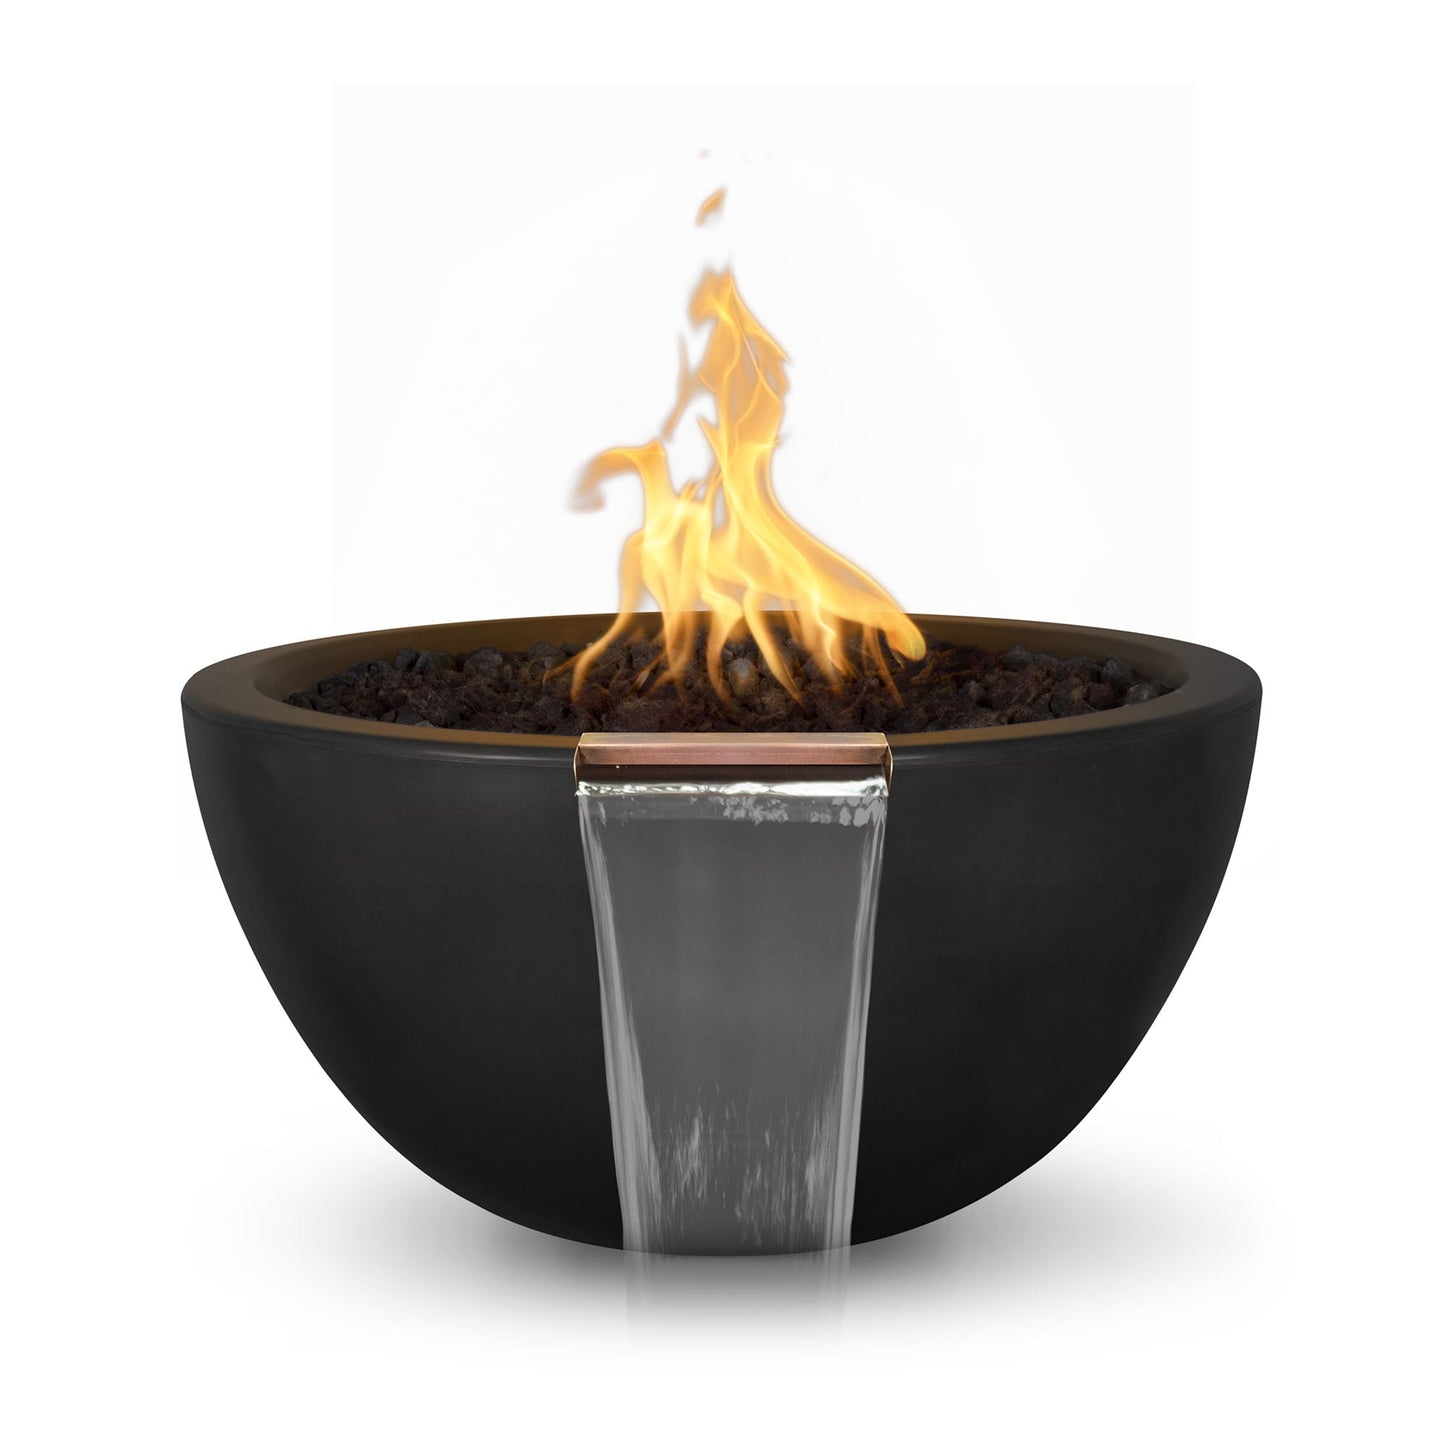 The Outdoor Plus Round Luna 30" White GFRC Concrete Natural Gas Fire & Water Bowl with Match Lit with Flame Sense Ignition